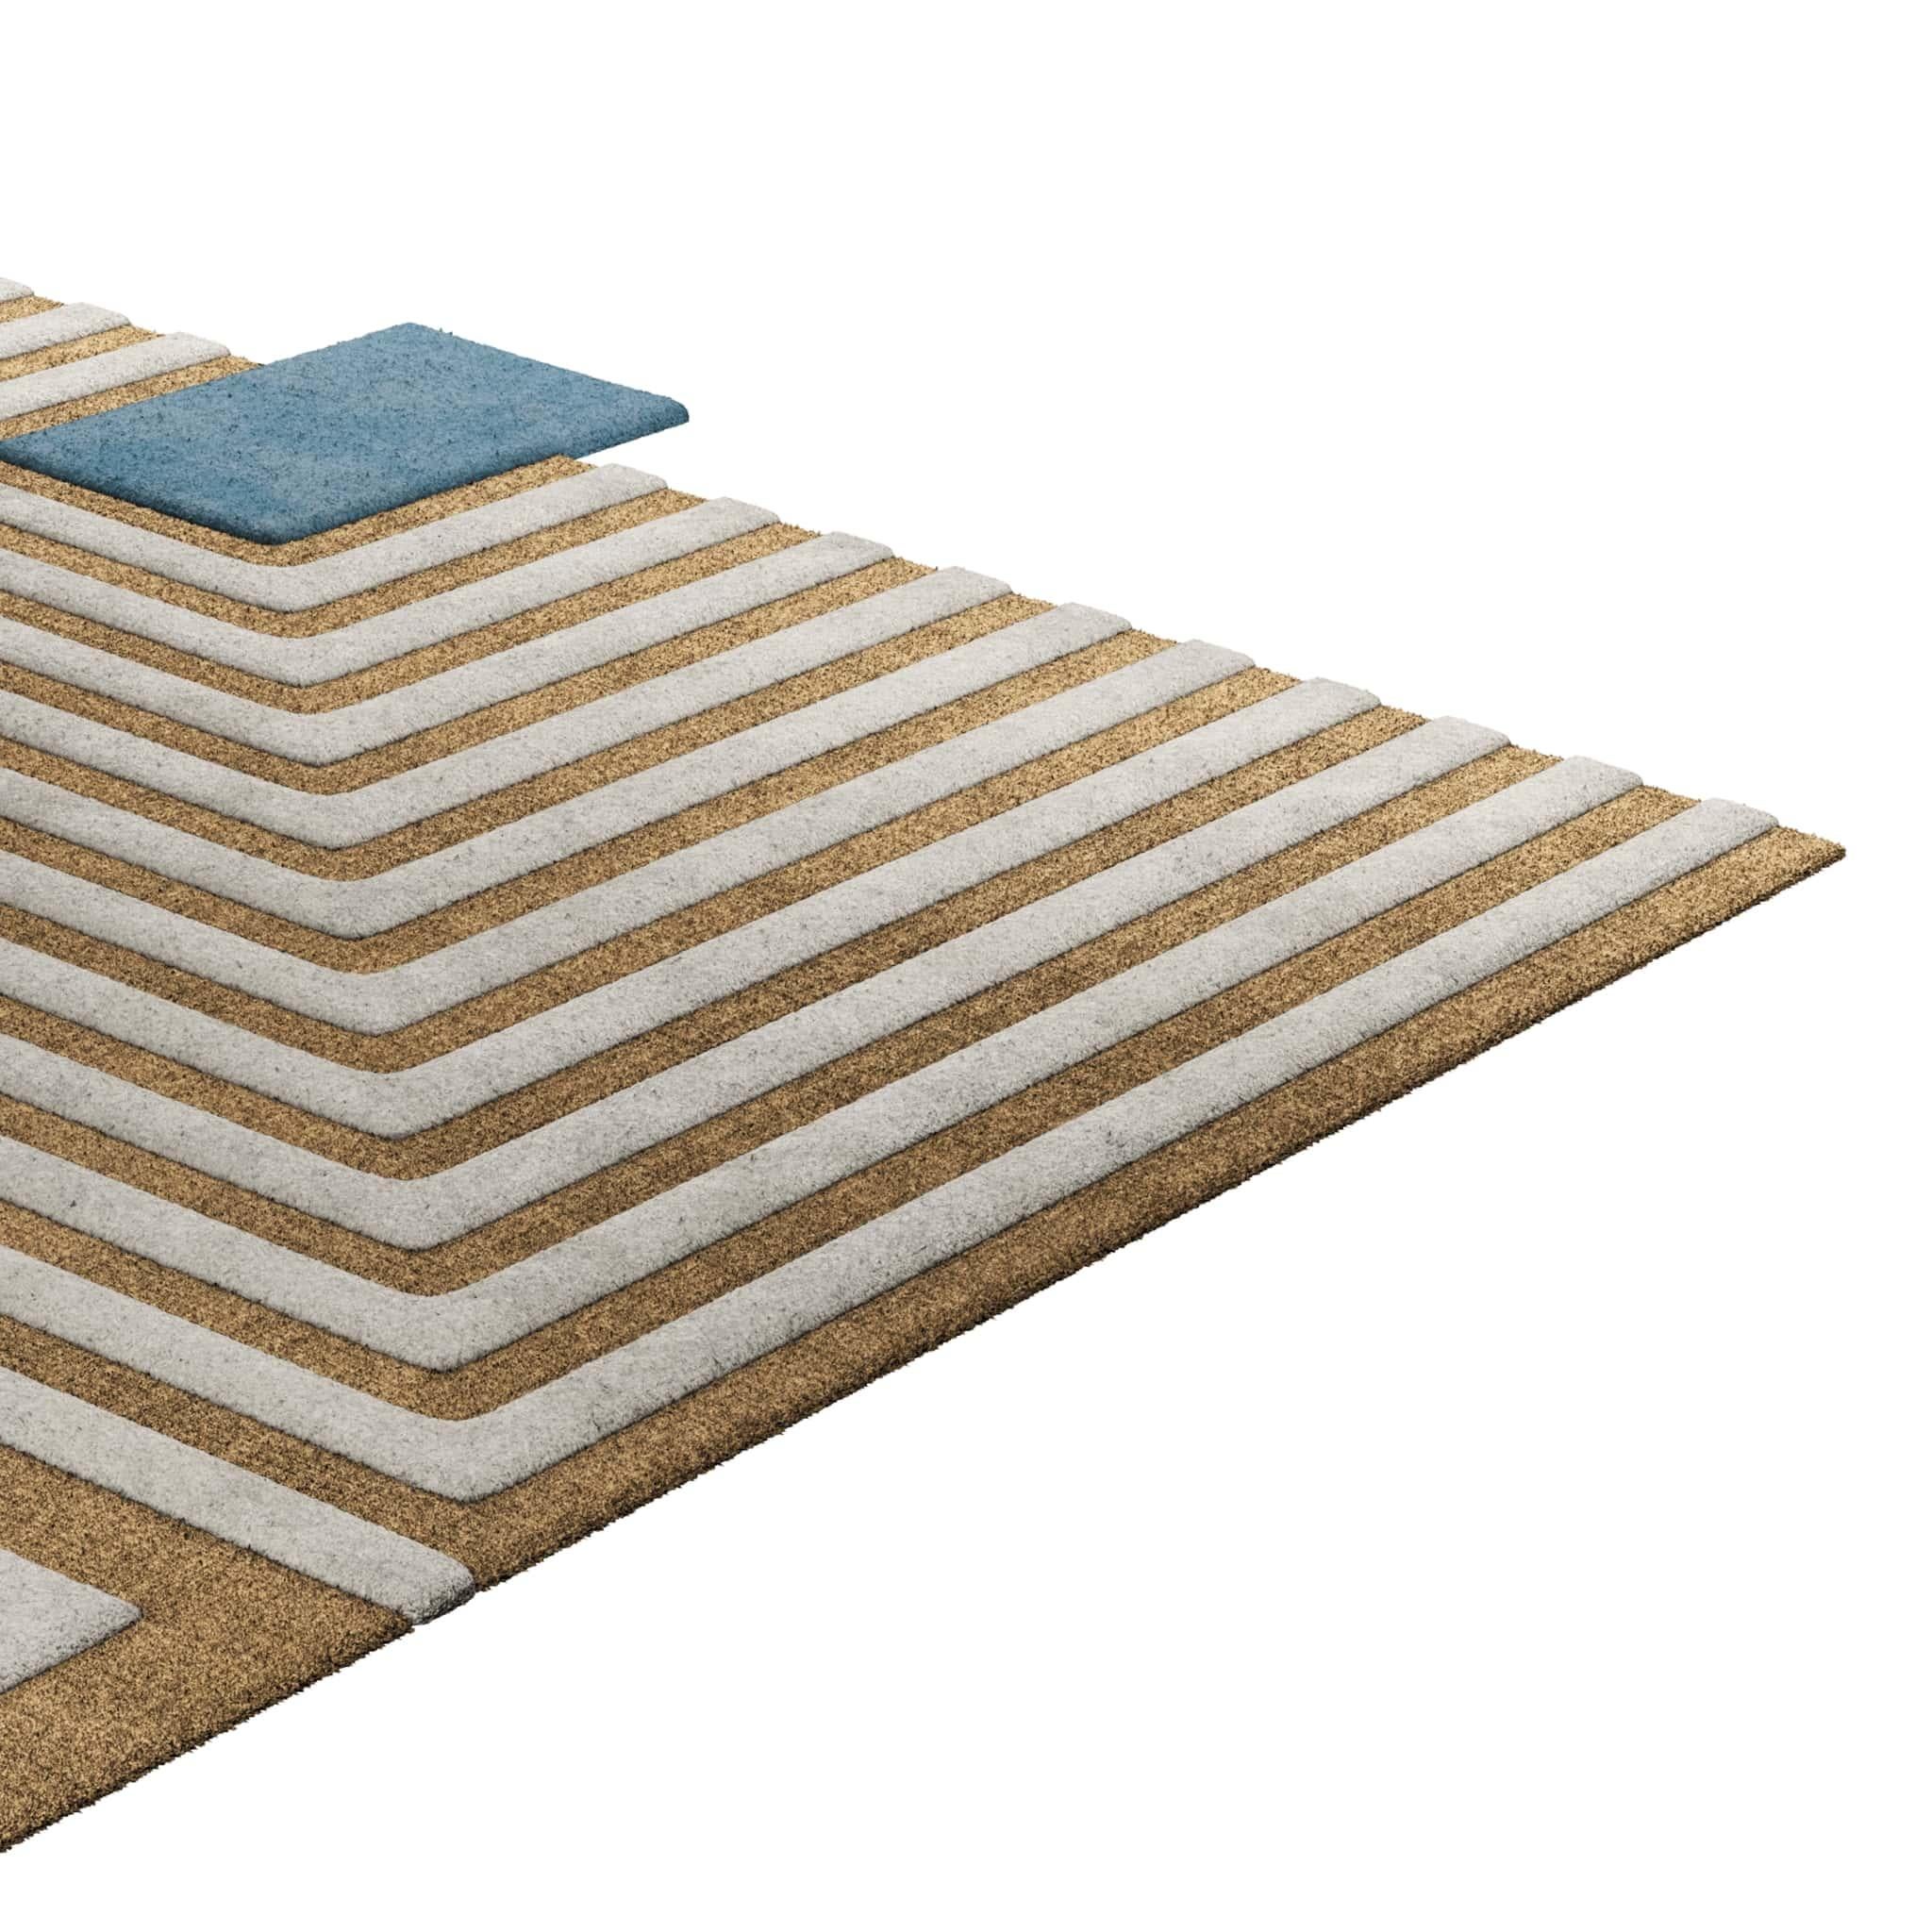 Tapis Retro #014 is a retro rug with an irregular shape and timeless colors. Inspired by architectural lines, this geometric rug makes a statement in any living space. 

Using a 3D-tufted technique that combines cut and loop pile, the retro rug in